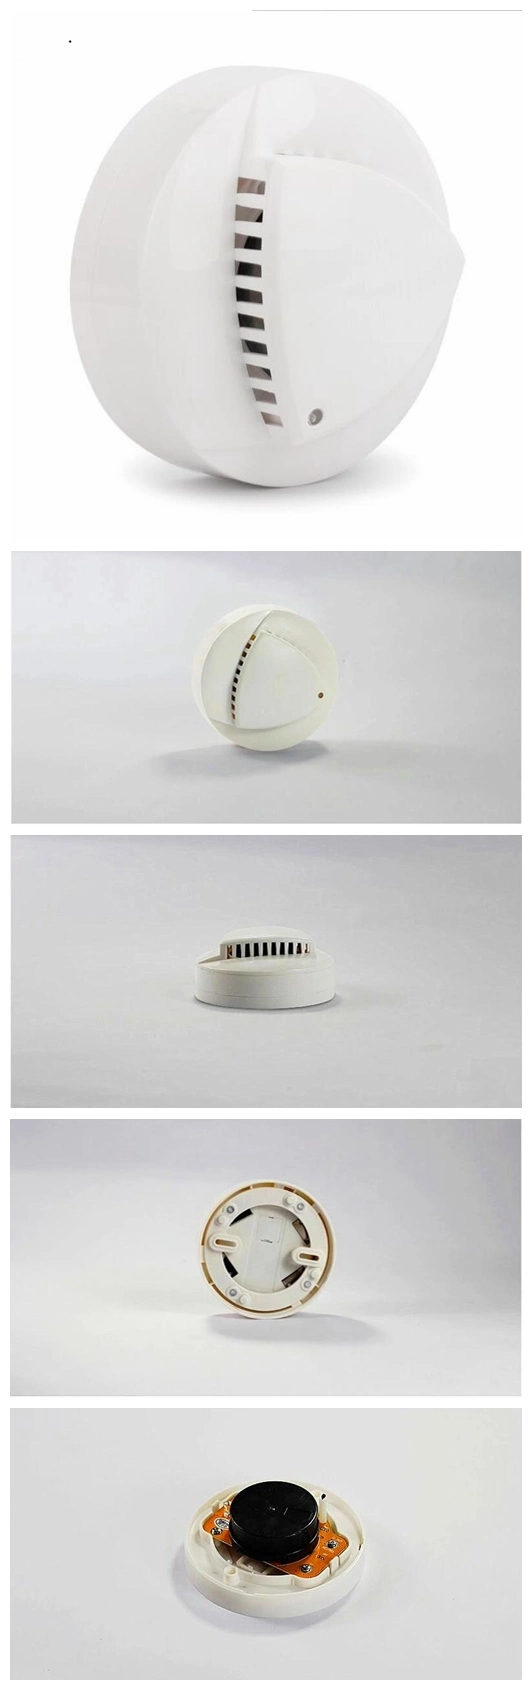 2-Wire Security Alarm Network Photoelectric Smoke &  Heat Alarm Detector for Alarm System